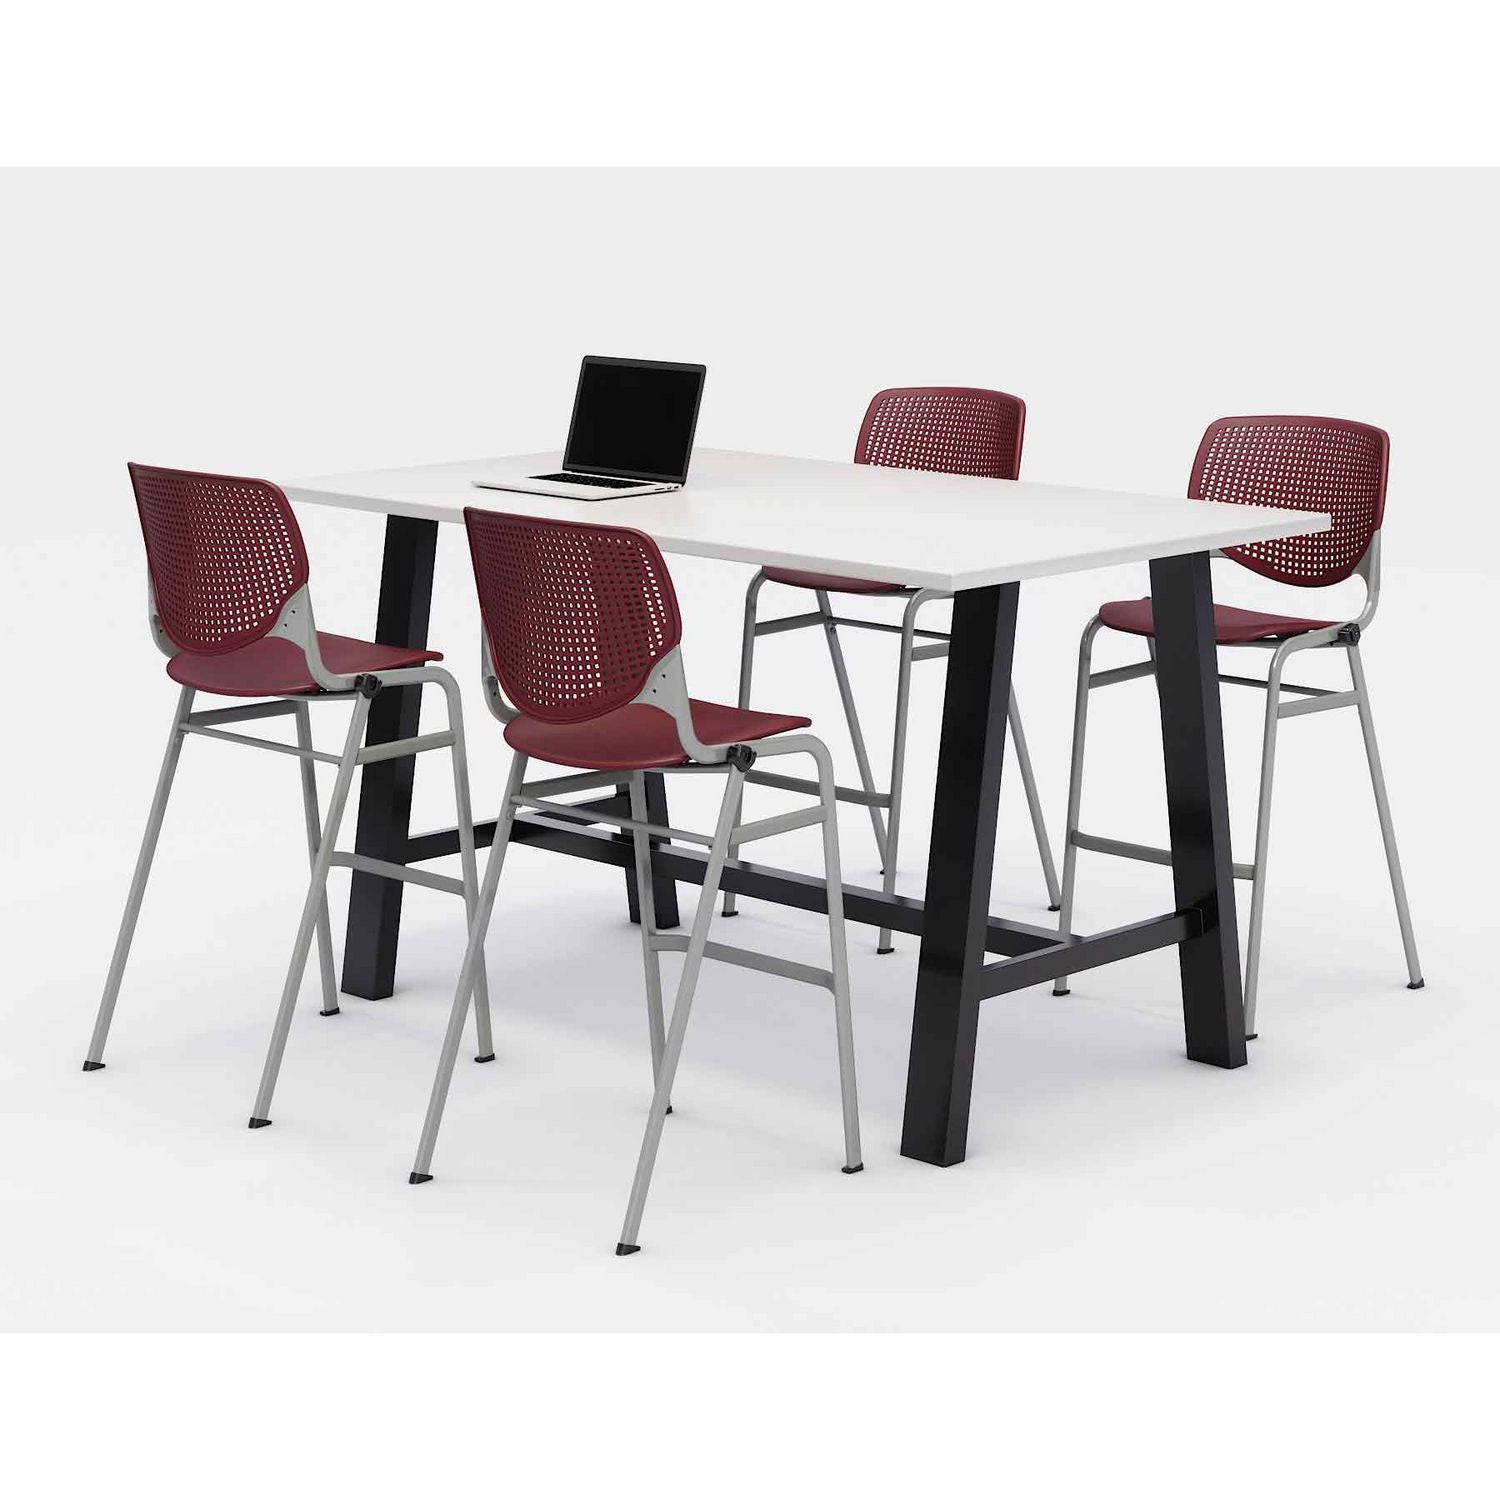 midtown-bistro-dining-table-with-four-burgundy-kool-barstools-36-x-72-x-41-designer-white-ships-in-4-6-business-days_kfi840031900555 - 1